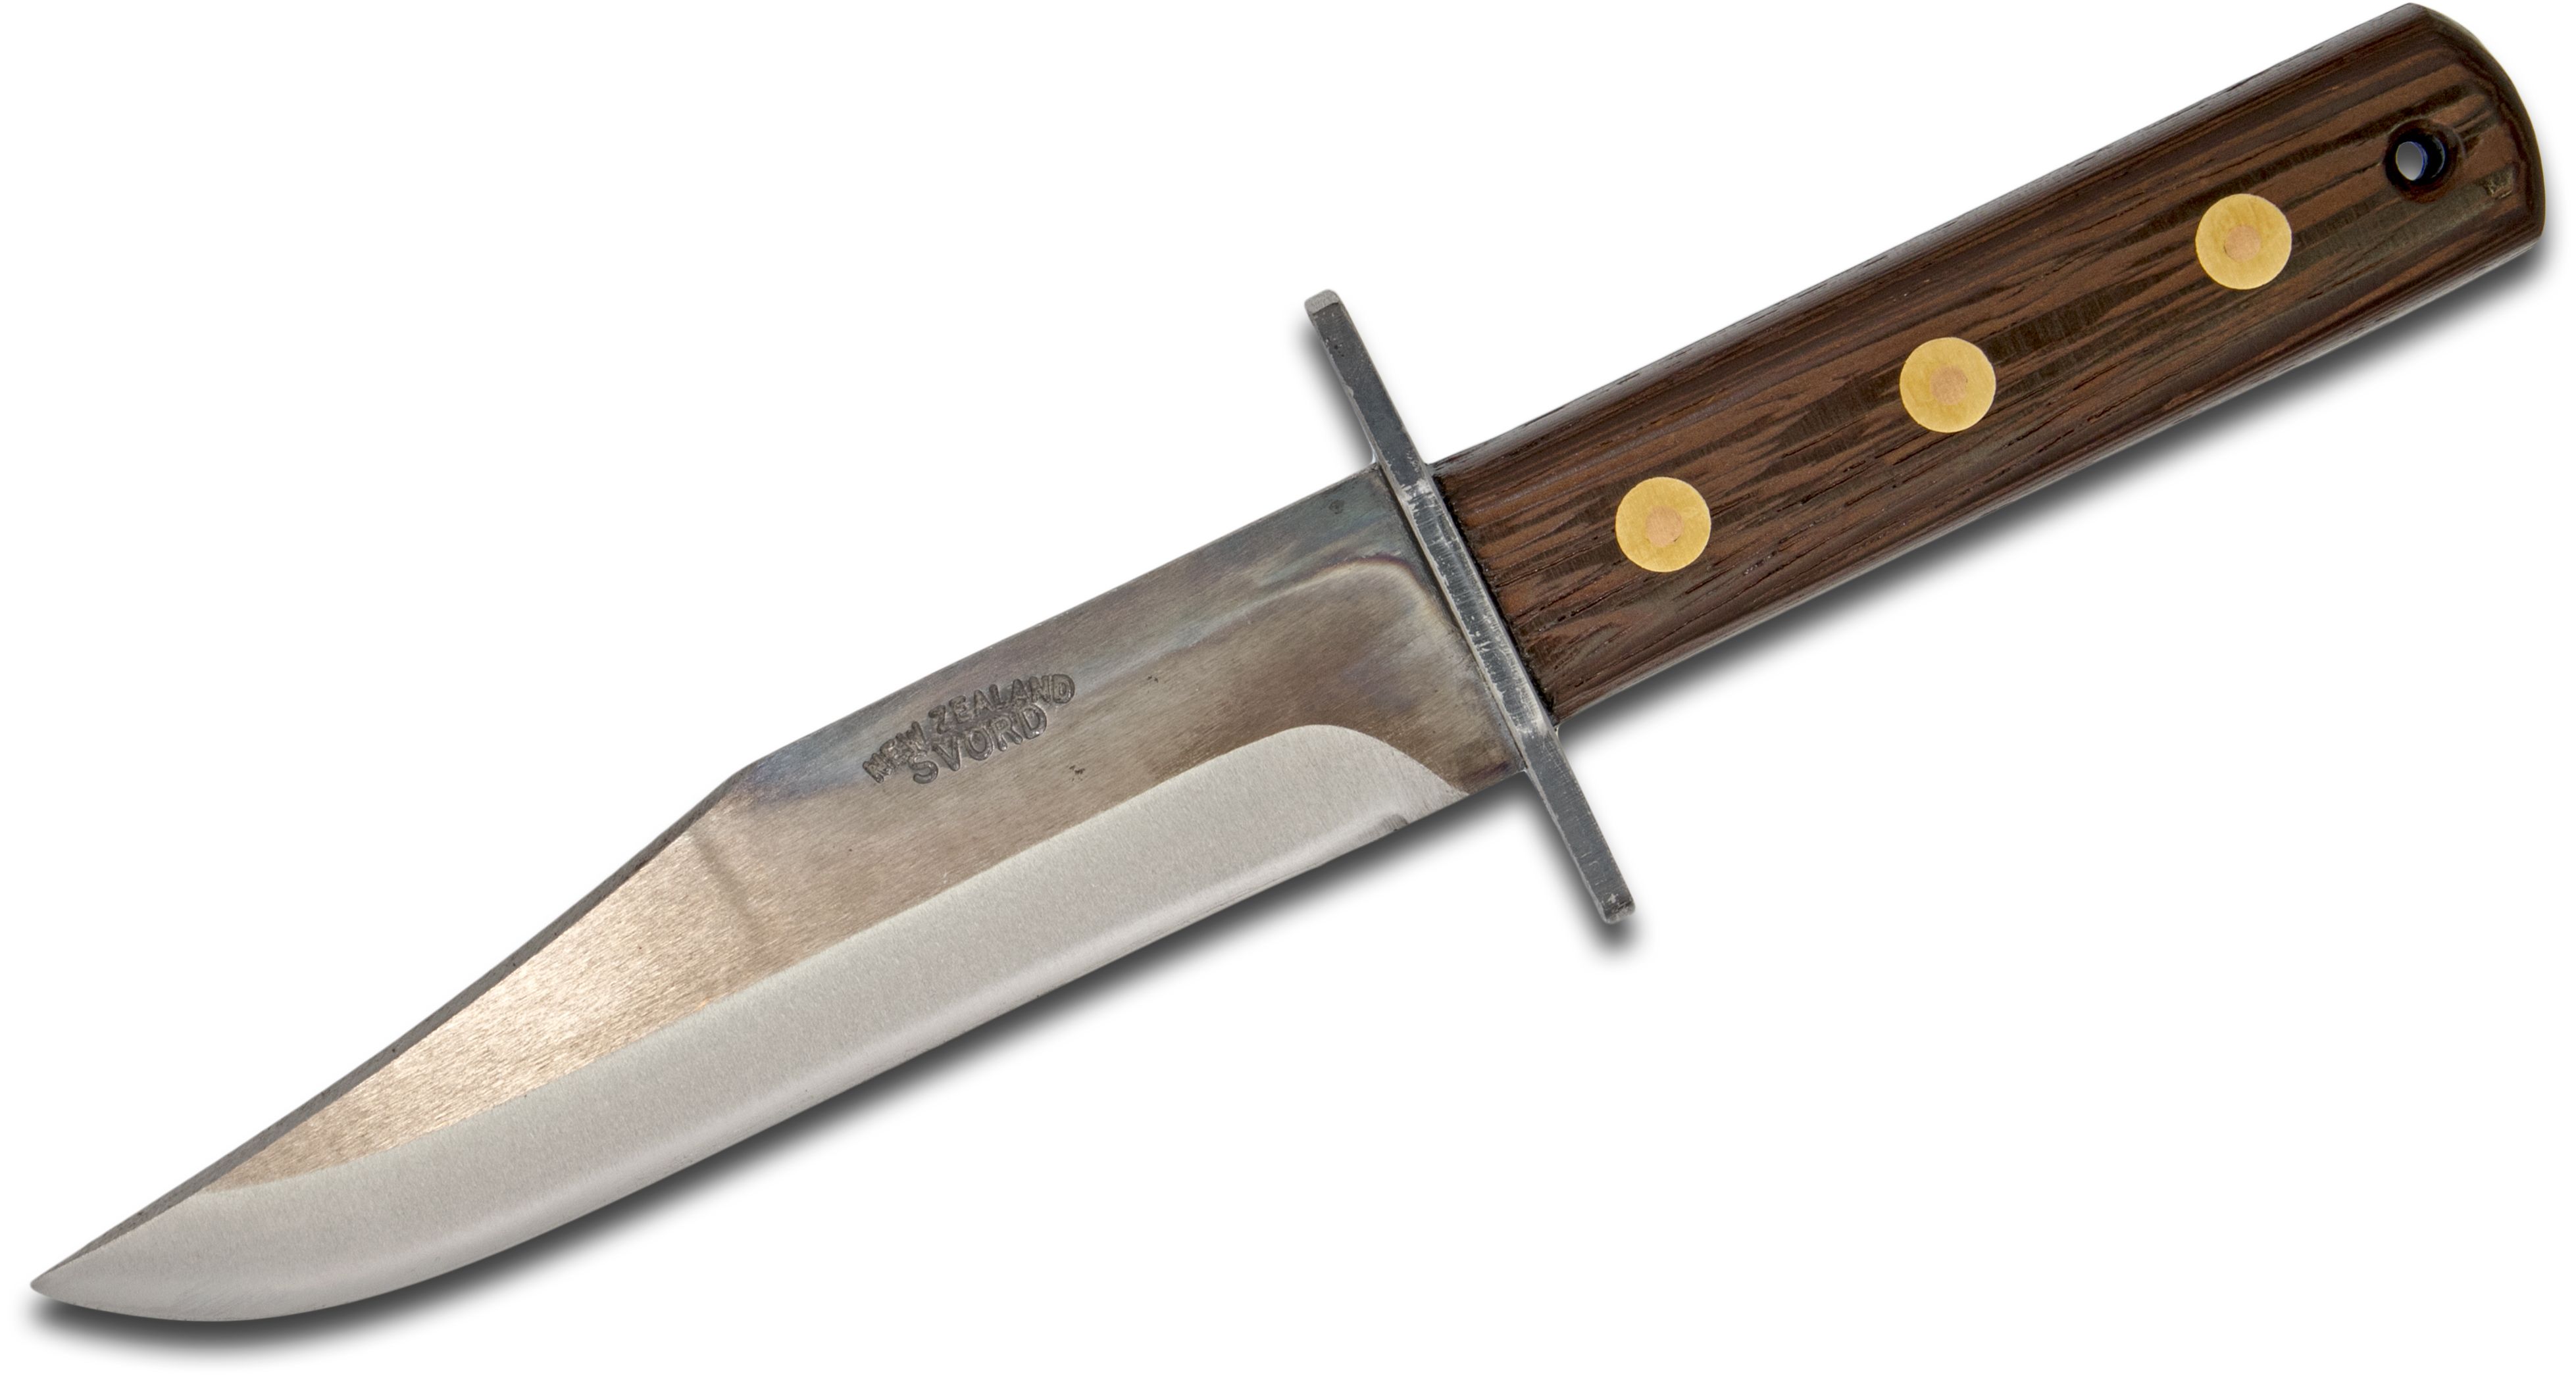 Kiwi Blade Knives  Handcrafted kitchen knives and outdoor knives in  Auckland, NZ